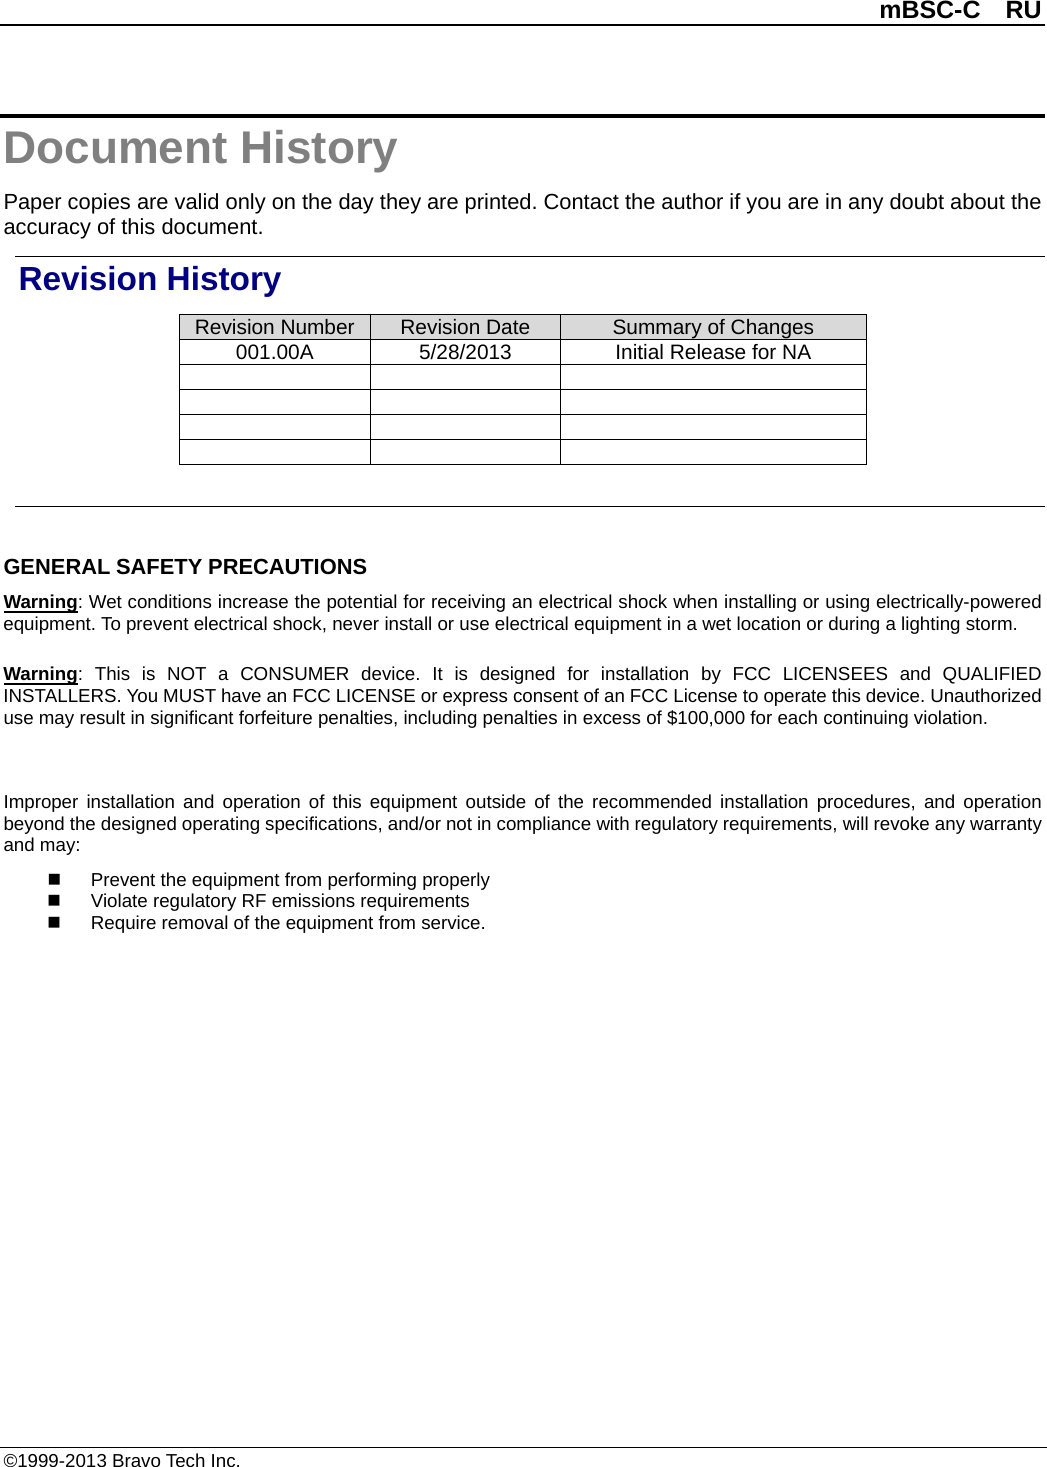          mBSC-C  RU   ©1999-2013 Bravo Tech Inc. Document History Paper copies are valid only on the day they are printed. Contact the author if you are in any doubt about the accuracy of this document. Revision History Revision Number Revision Date Summary of Changes 001.00A 5/28/2013 Initial Release for NA                 GENERAL SAFETY PRECAUTIONS Warning: Wet conditions increase the potential for receiving an electrical shock when installing or using electrically-powered equipment. To prevent electrical shock, never install or use electrical equipment in a wet location or during a lighting storm. Warning:  This is NOT a CONSUMER device. It is designed for installation by FCC LICENSEES and QUALIFIED INSTALLERS. You MUST have an FCC LICENSE or express consent of an FCC License to operate this device. Unauthorized use may result in significant forfeiture penalties, including penalties in excess of $100,000 for each continuing violation.  Improper installation and operation of this equipment outside of the recommended installation procedures, and operation beyond the designed operating specifications, and/or not in compliance with regulatory requirements, will revoke any warranty and may:  Prevent the equipment from performing properly  Violate regulatory RF emissions requirements  Require removal of the equipment from service.  